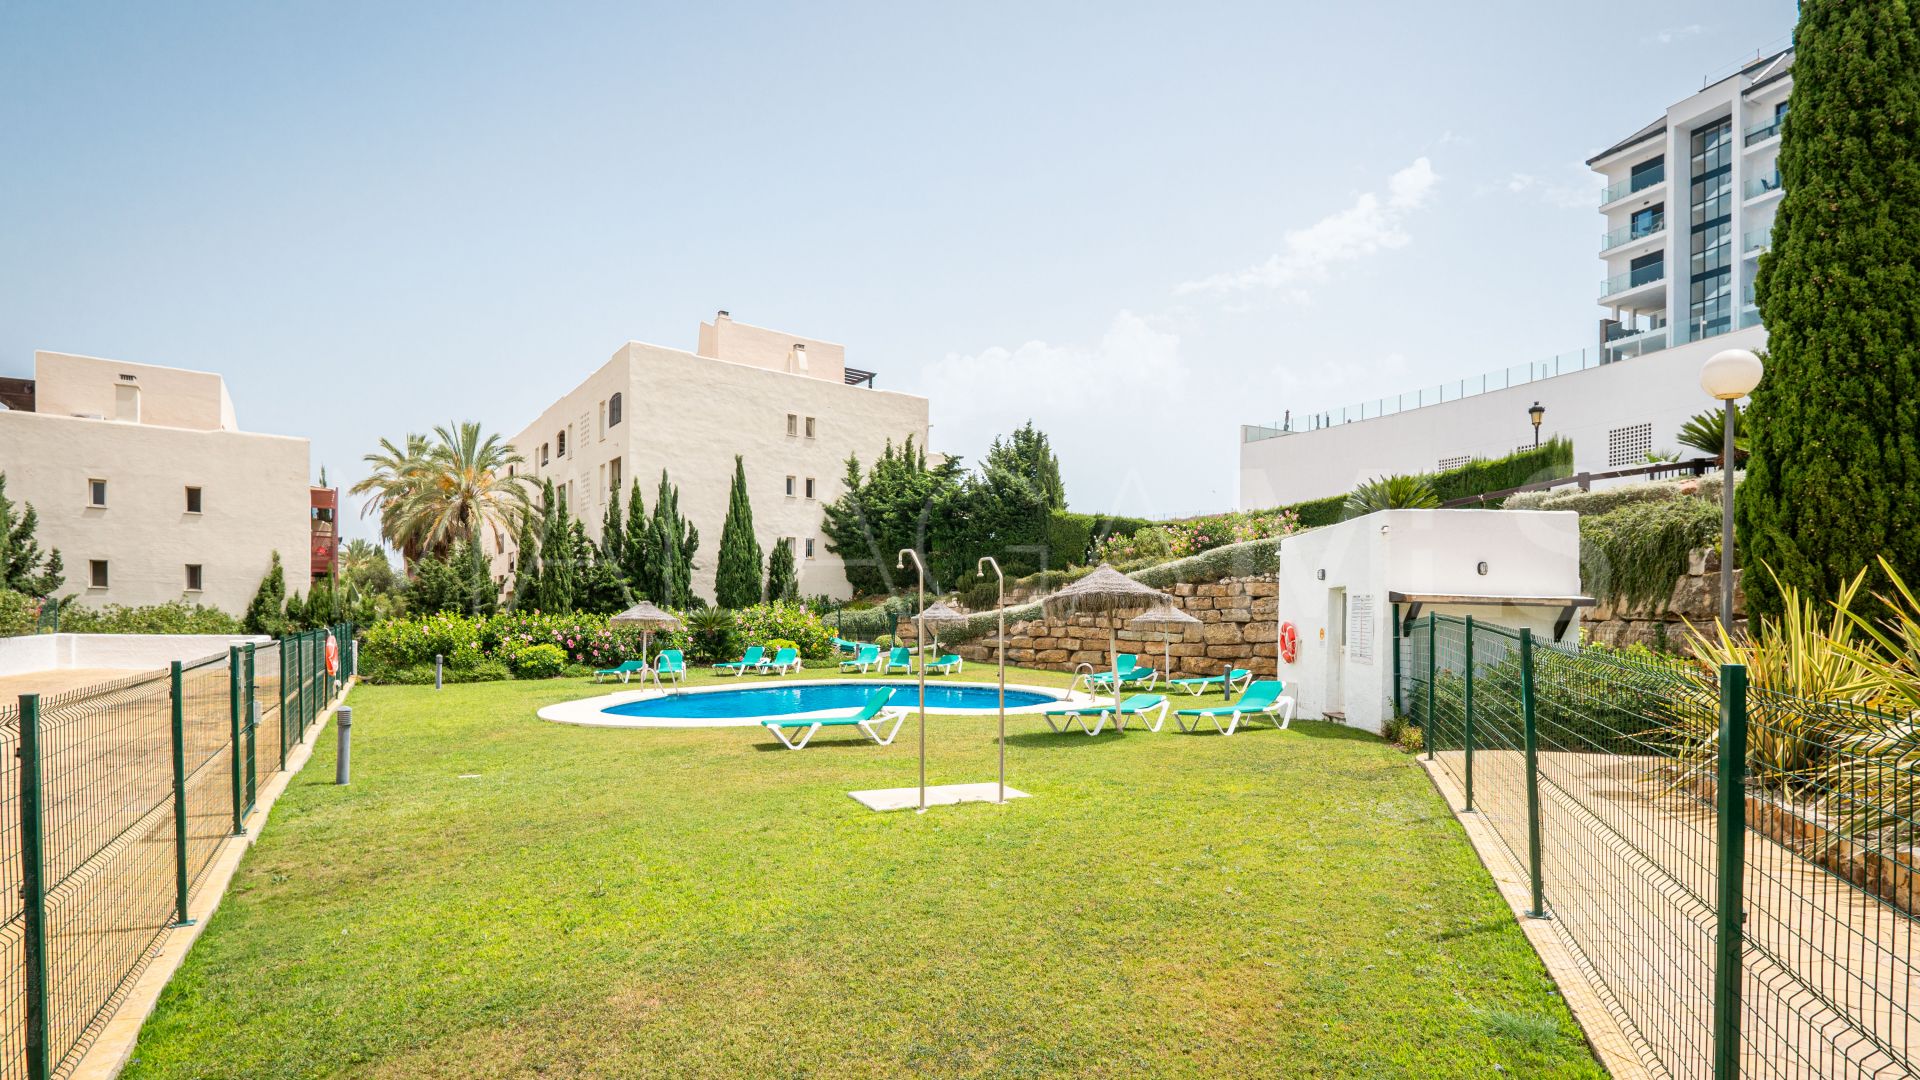 For sale ground floor apartment with 2 bedrooms in La Duquesa